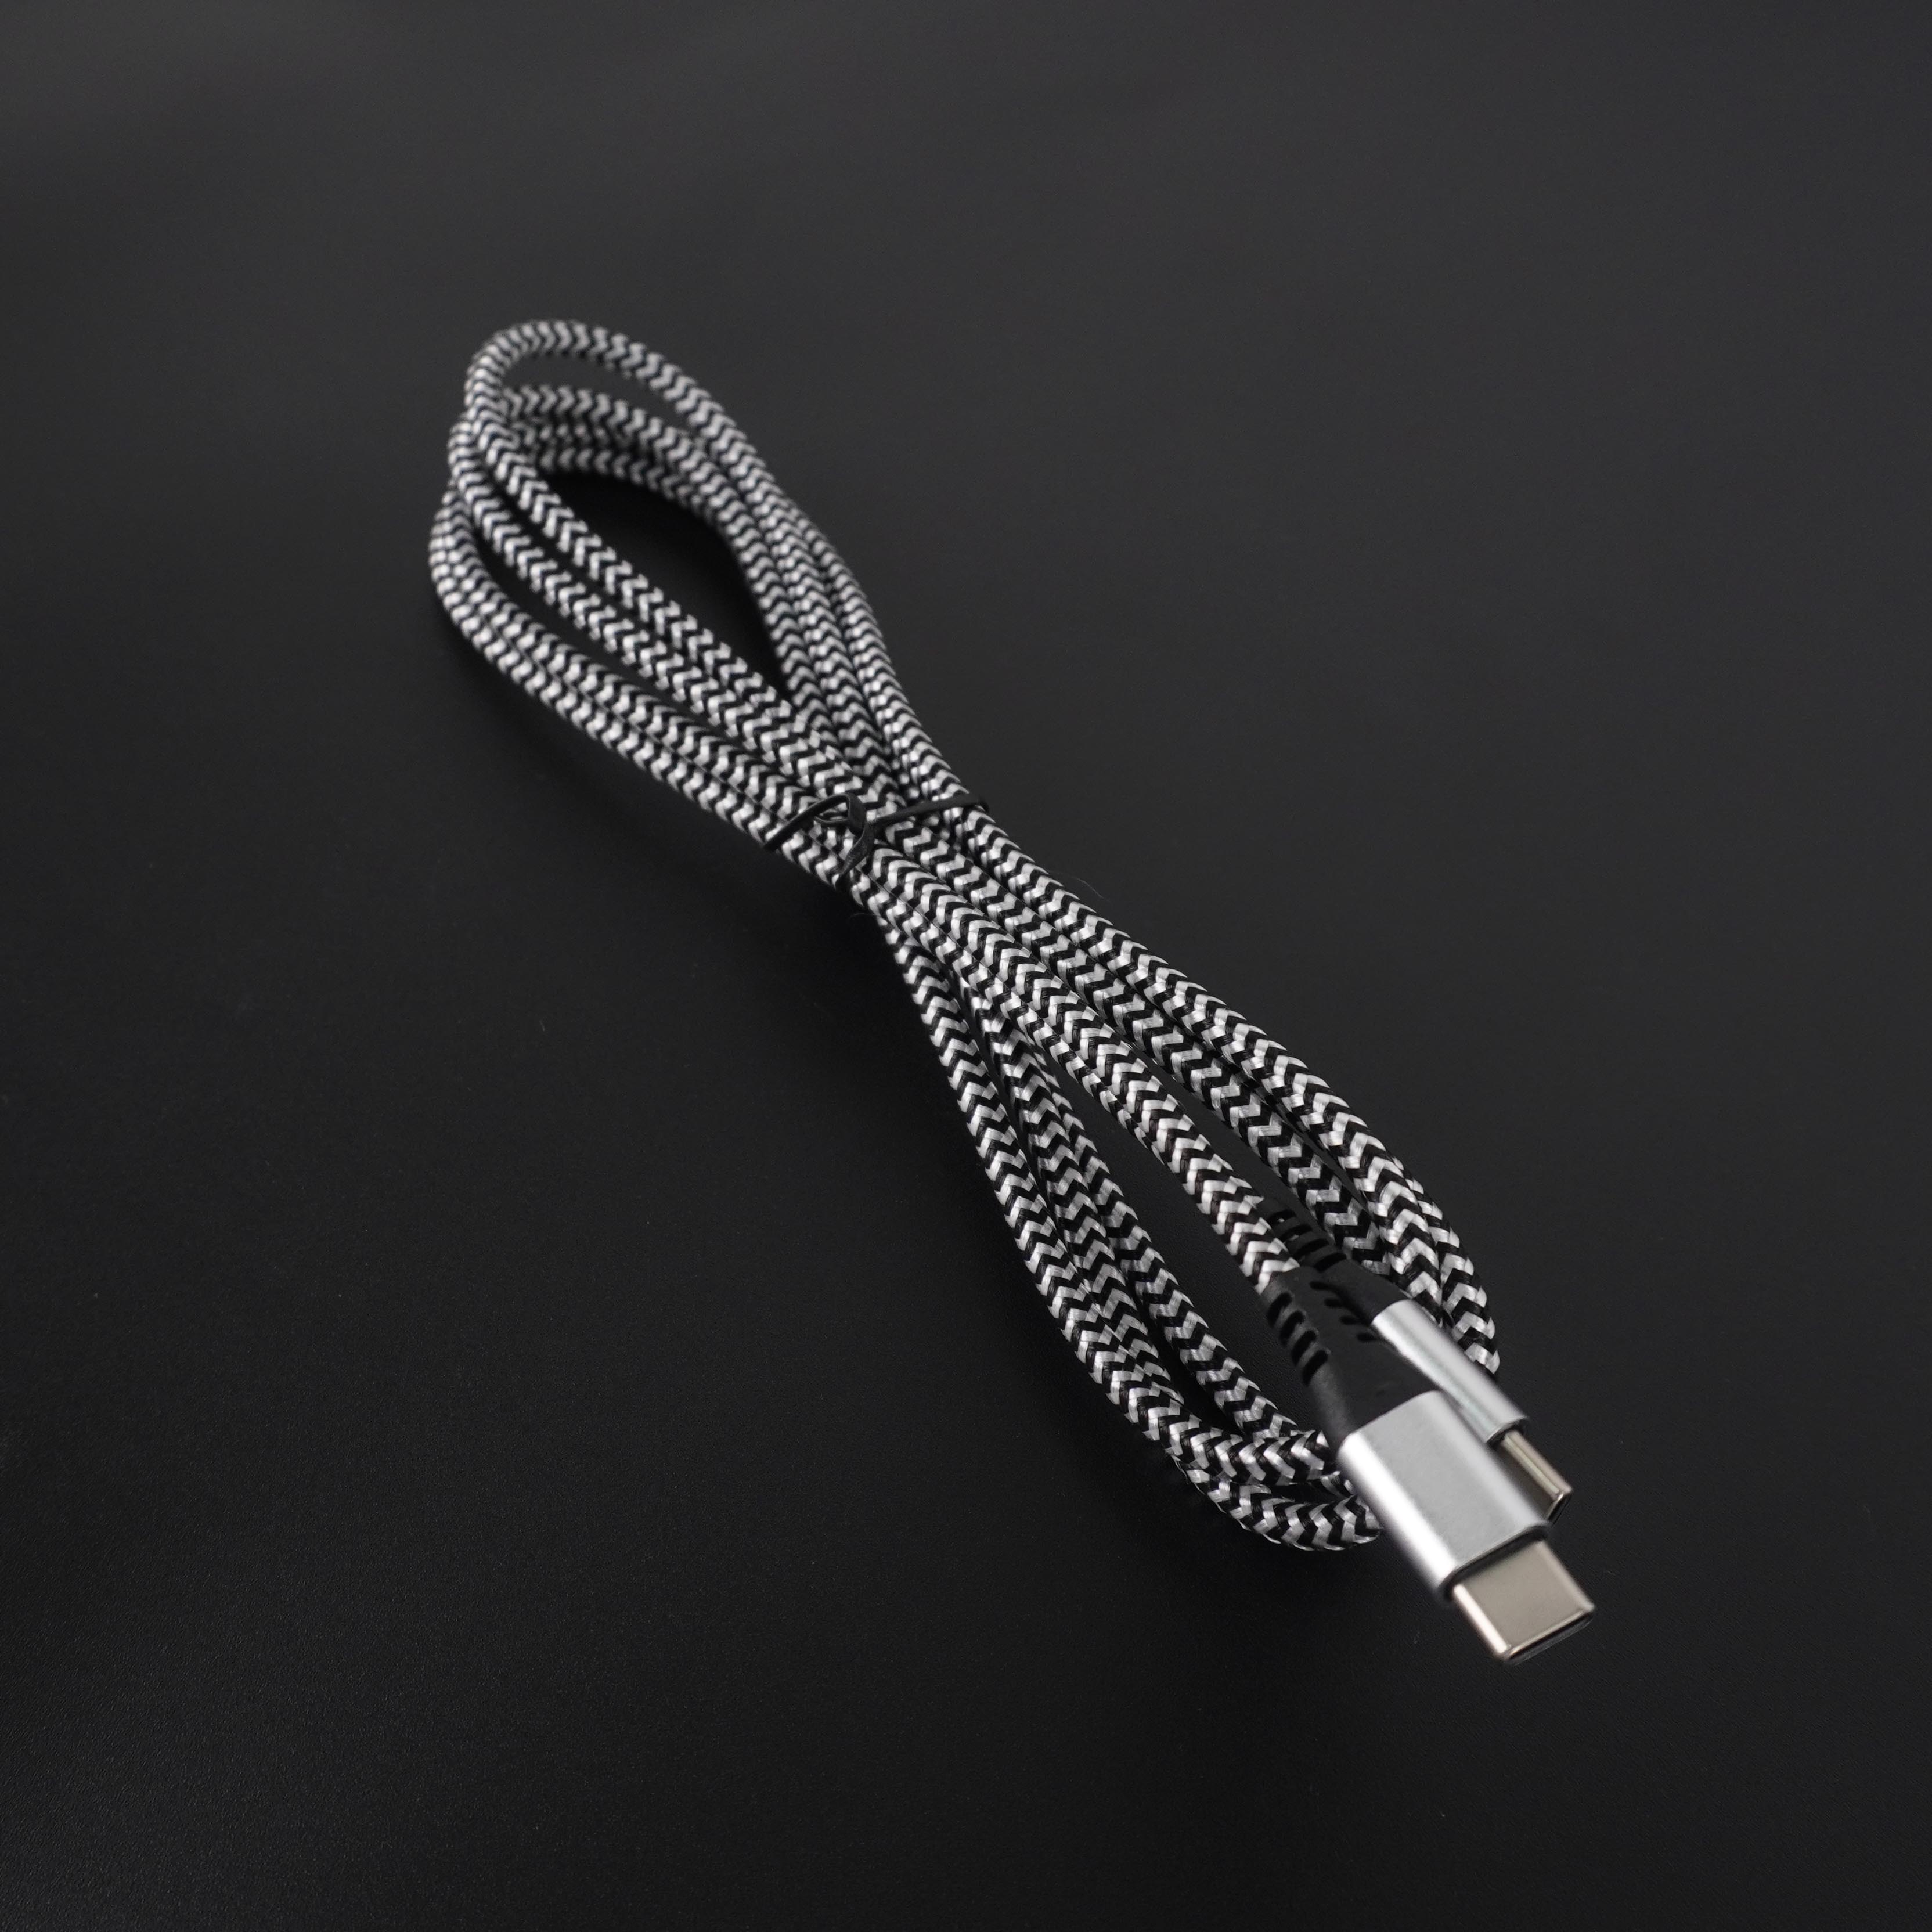  PD 60W 100W  USB C To  C Cable